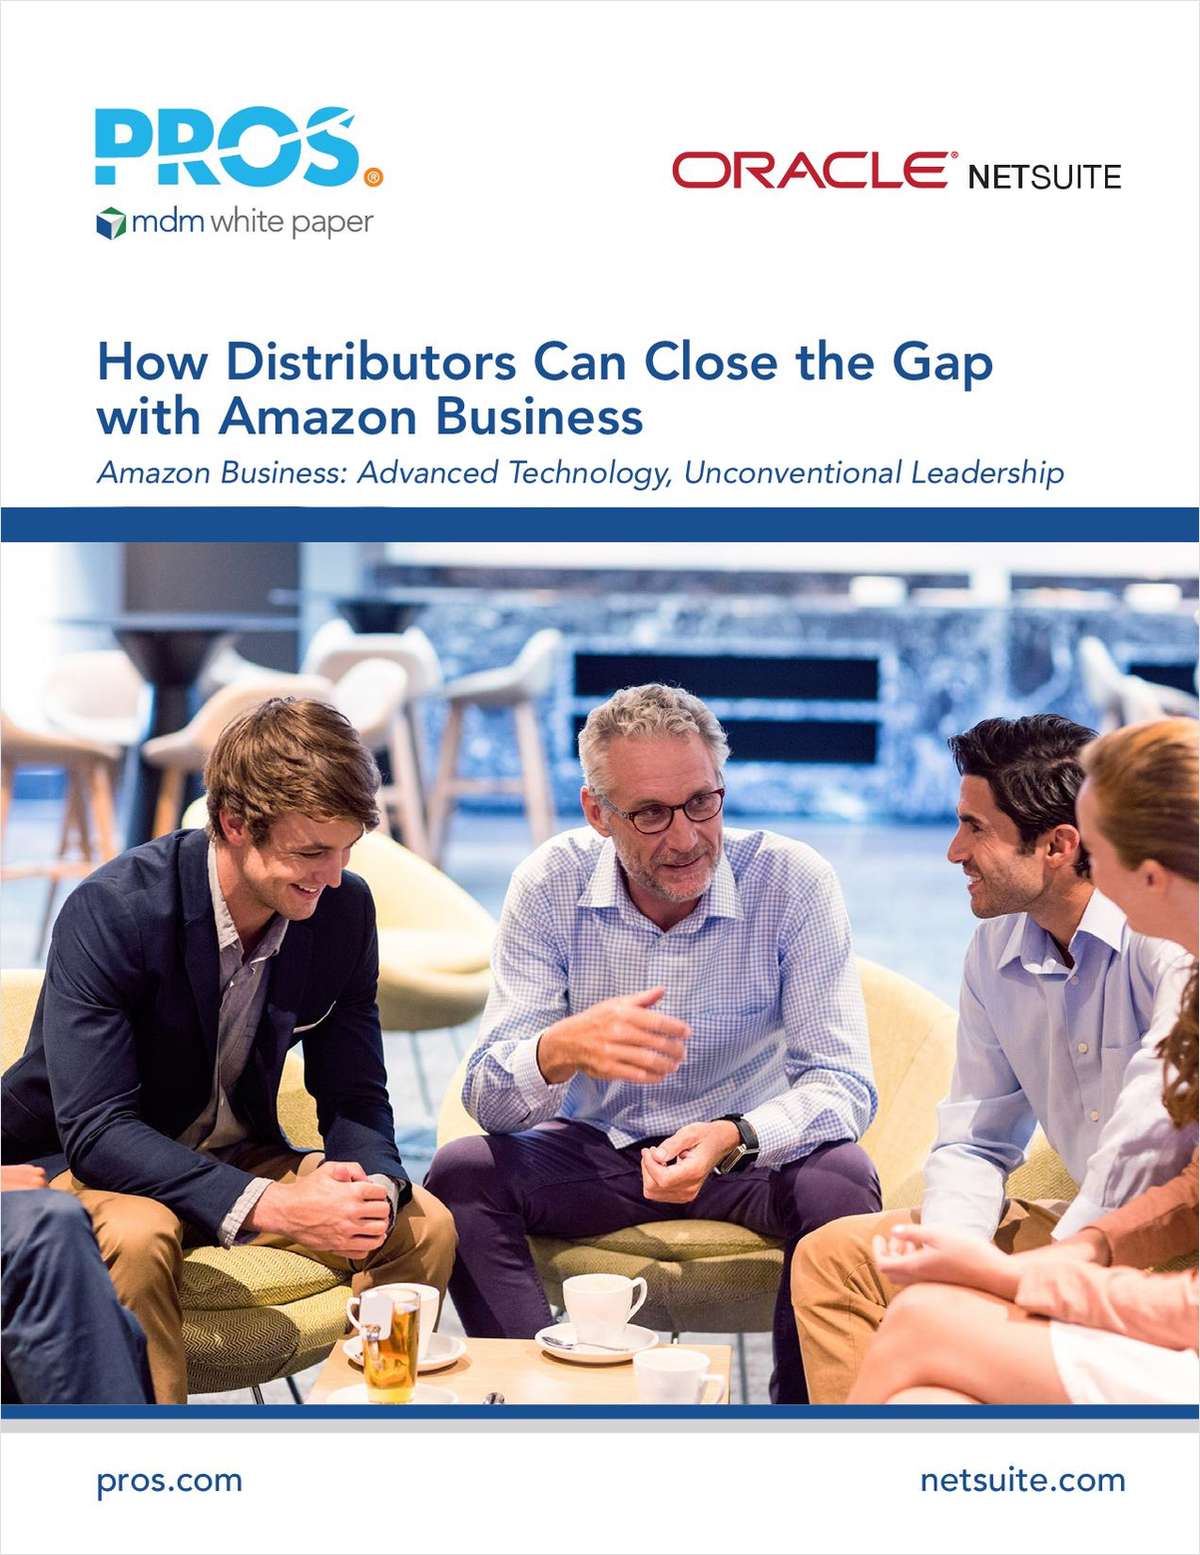 How Distributors Can Close the Gap with Amazon Business